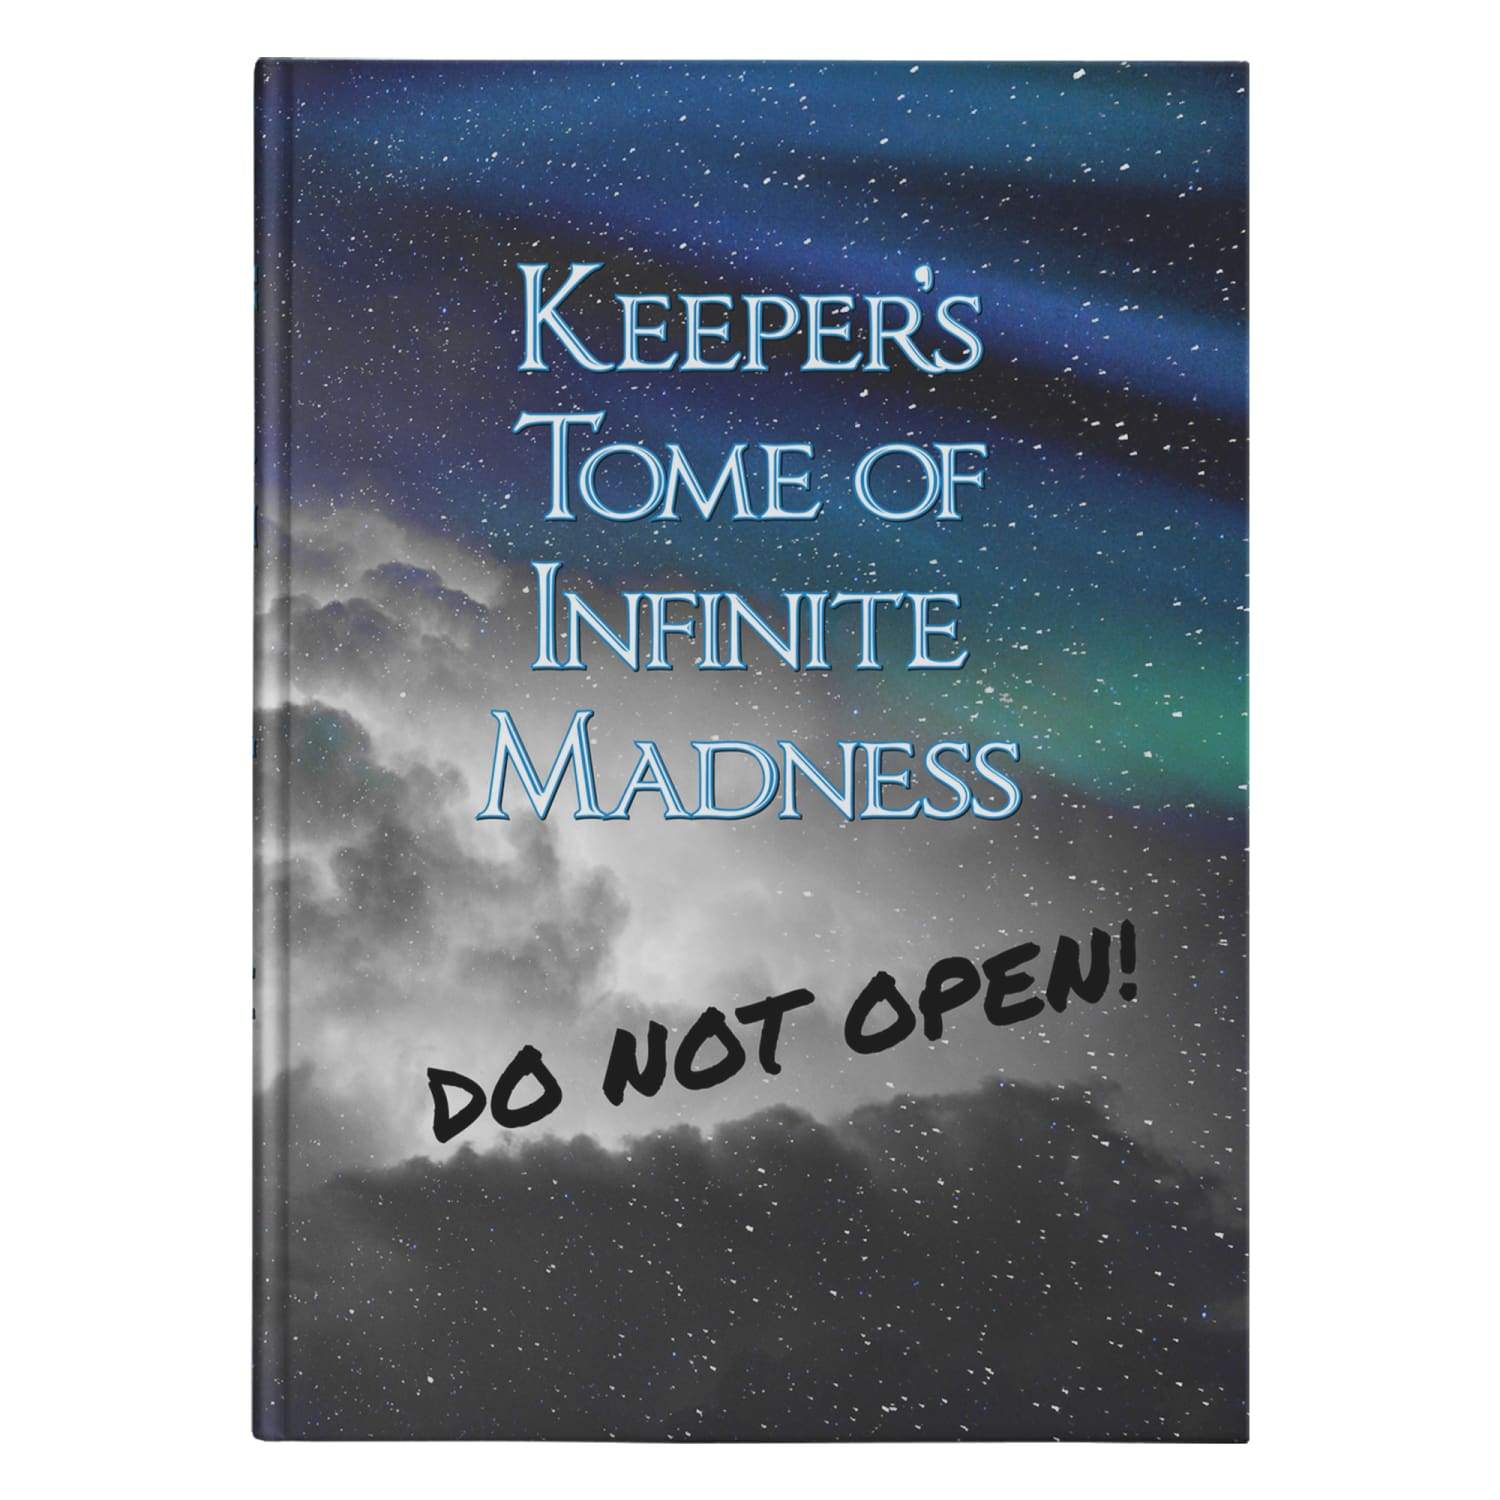 Keeper’s Tome of Infinite Madness Hardcover Journal - Small (5.75 x 8) - Journals